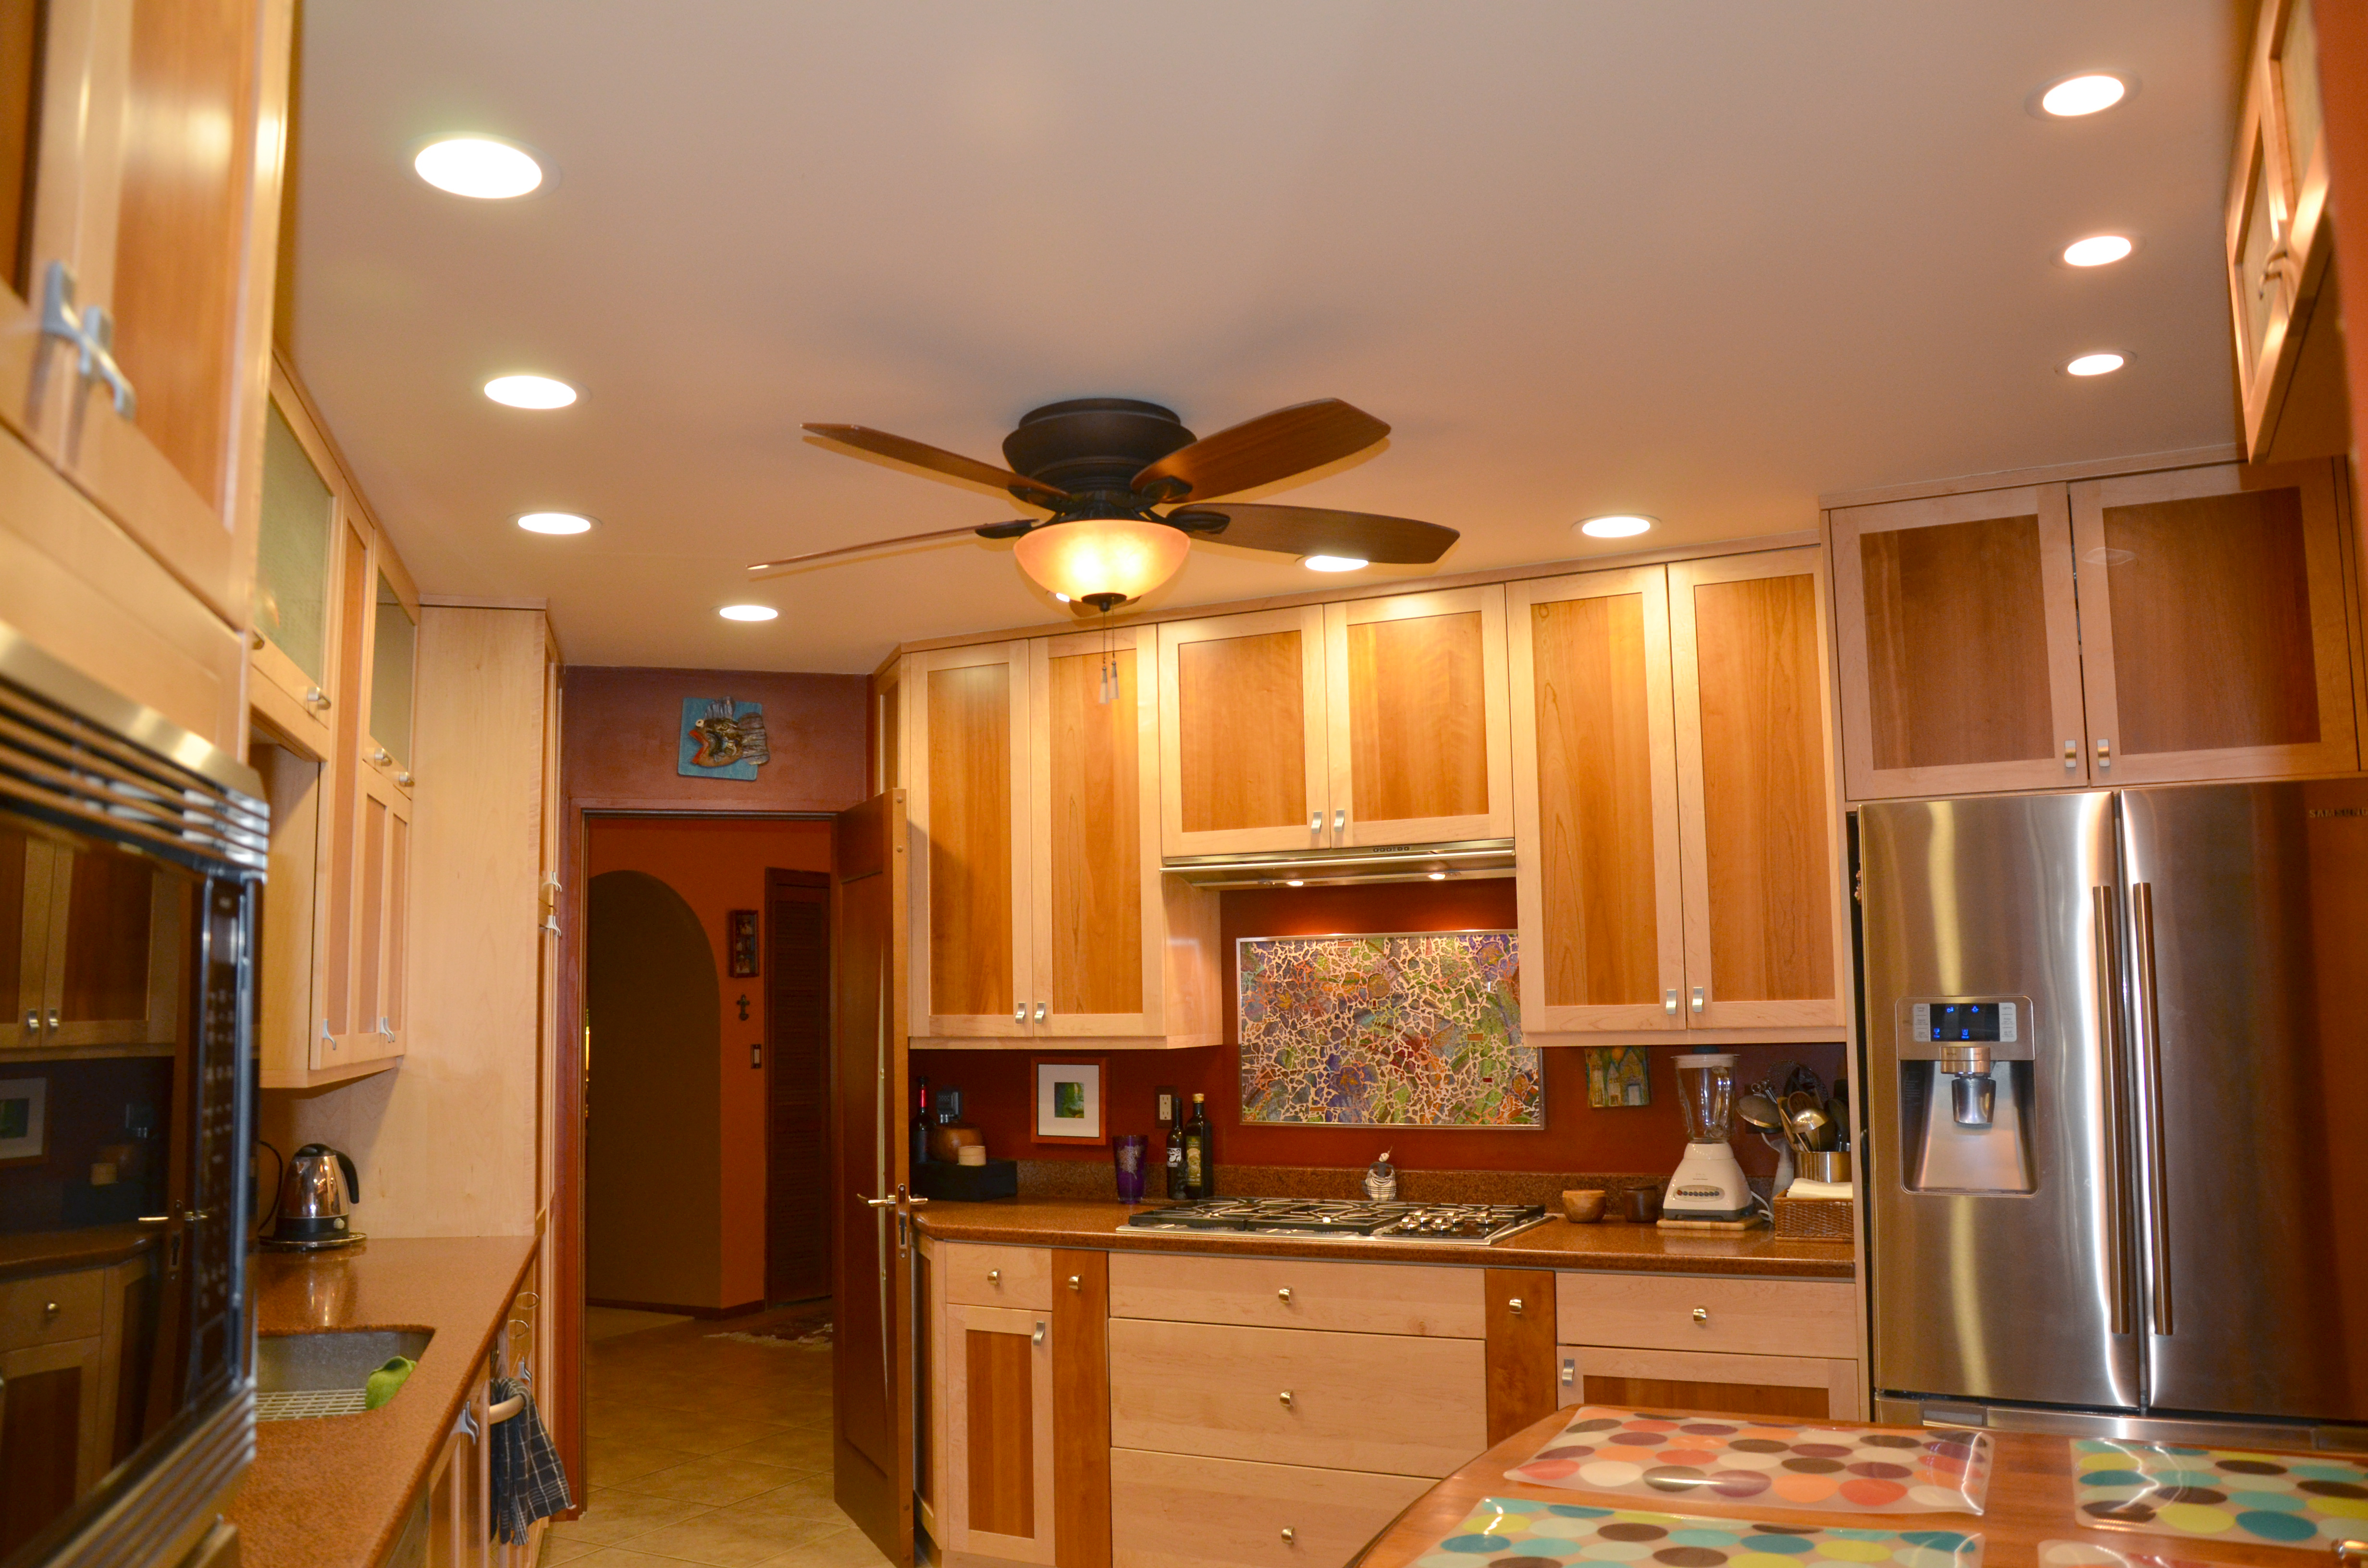 led ceiling recessed lights photo - 6